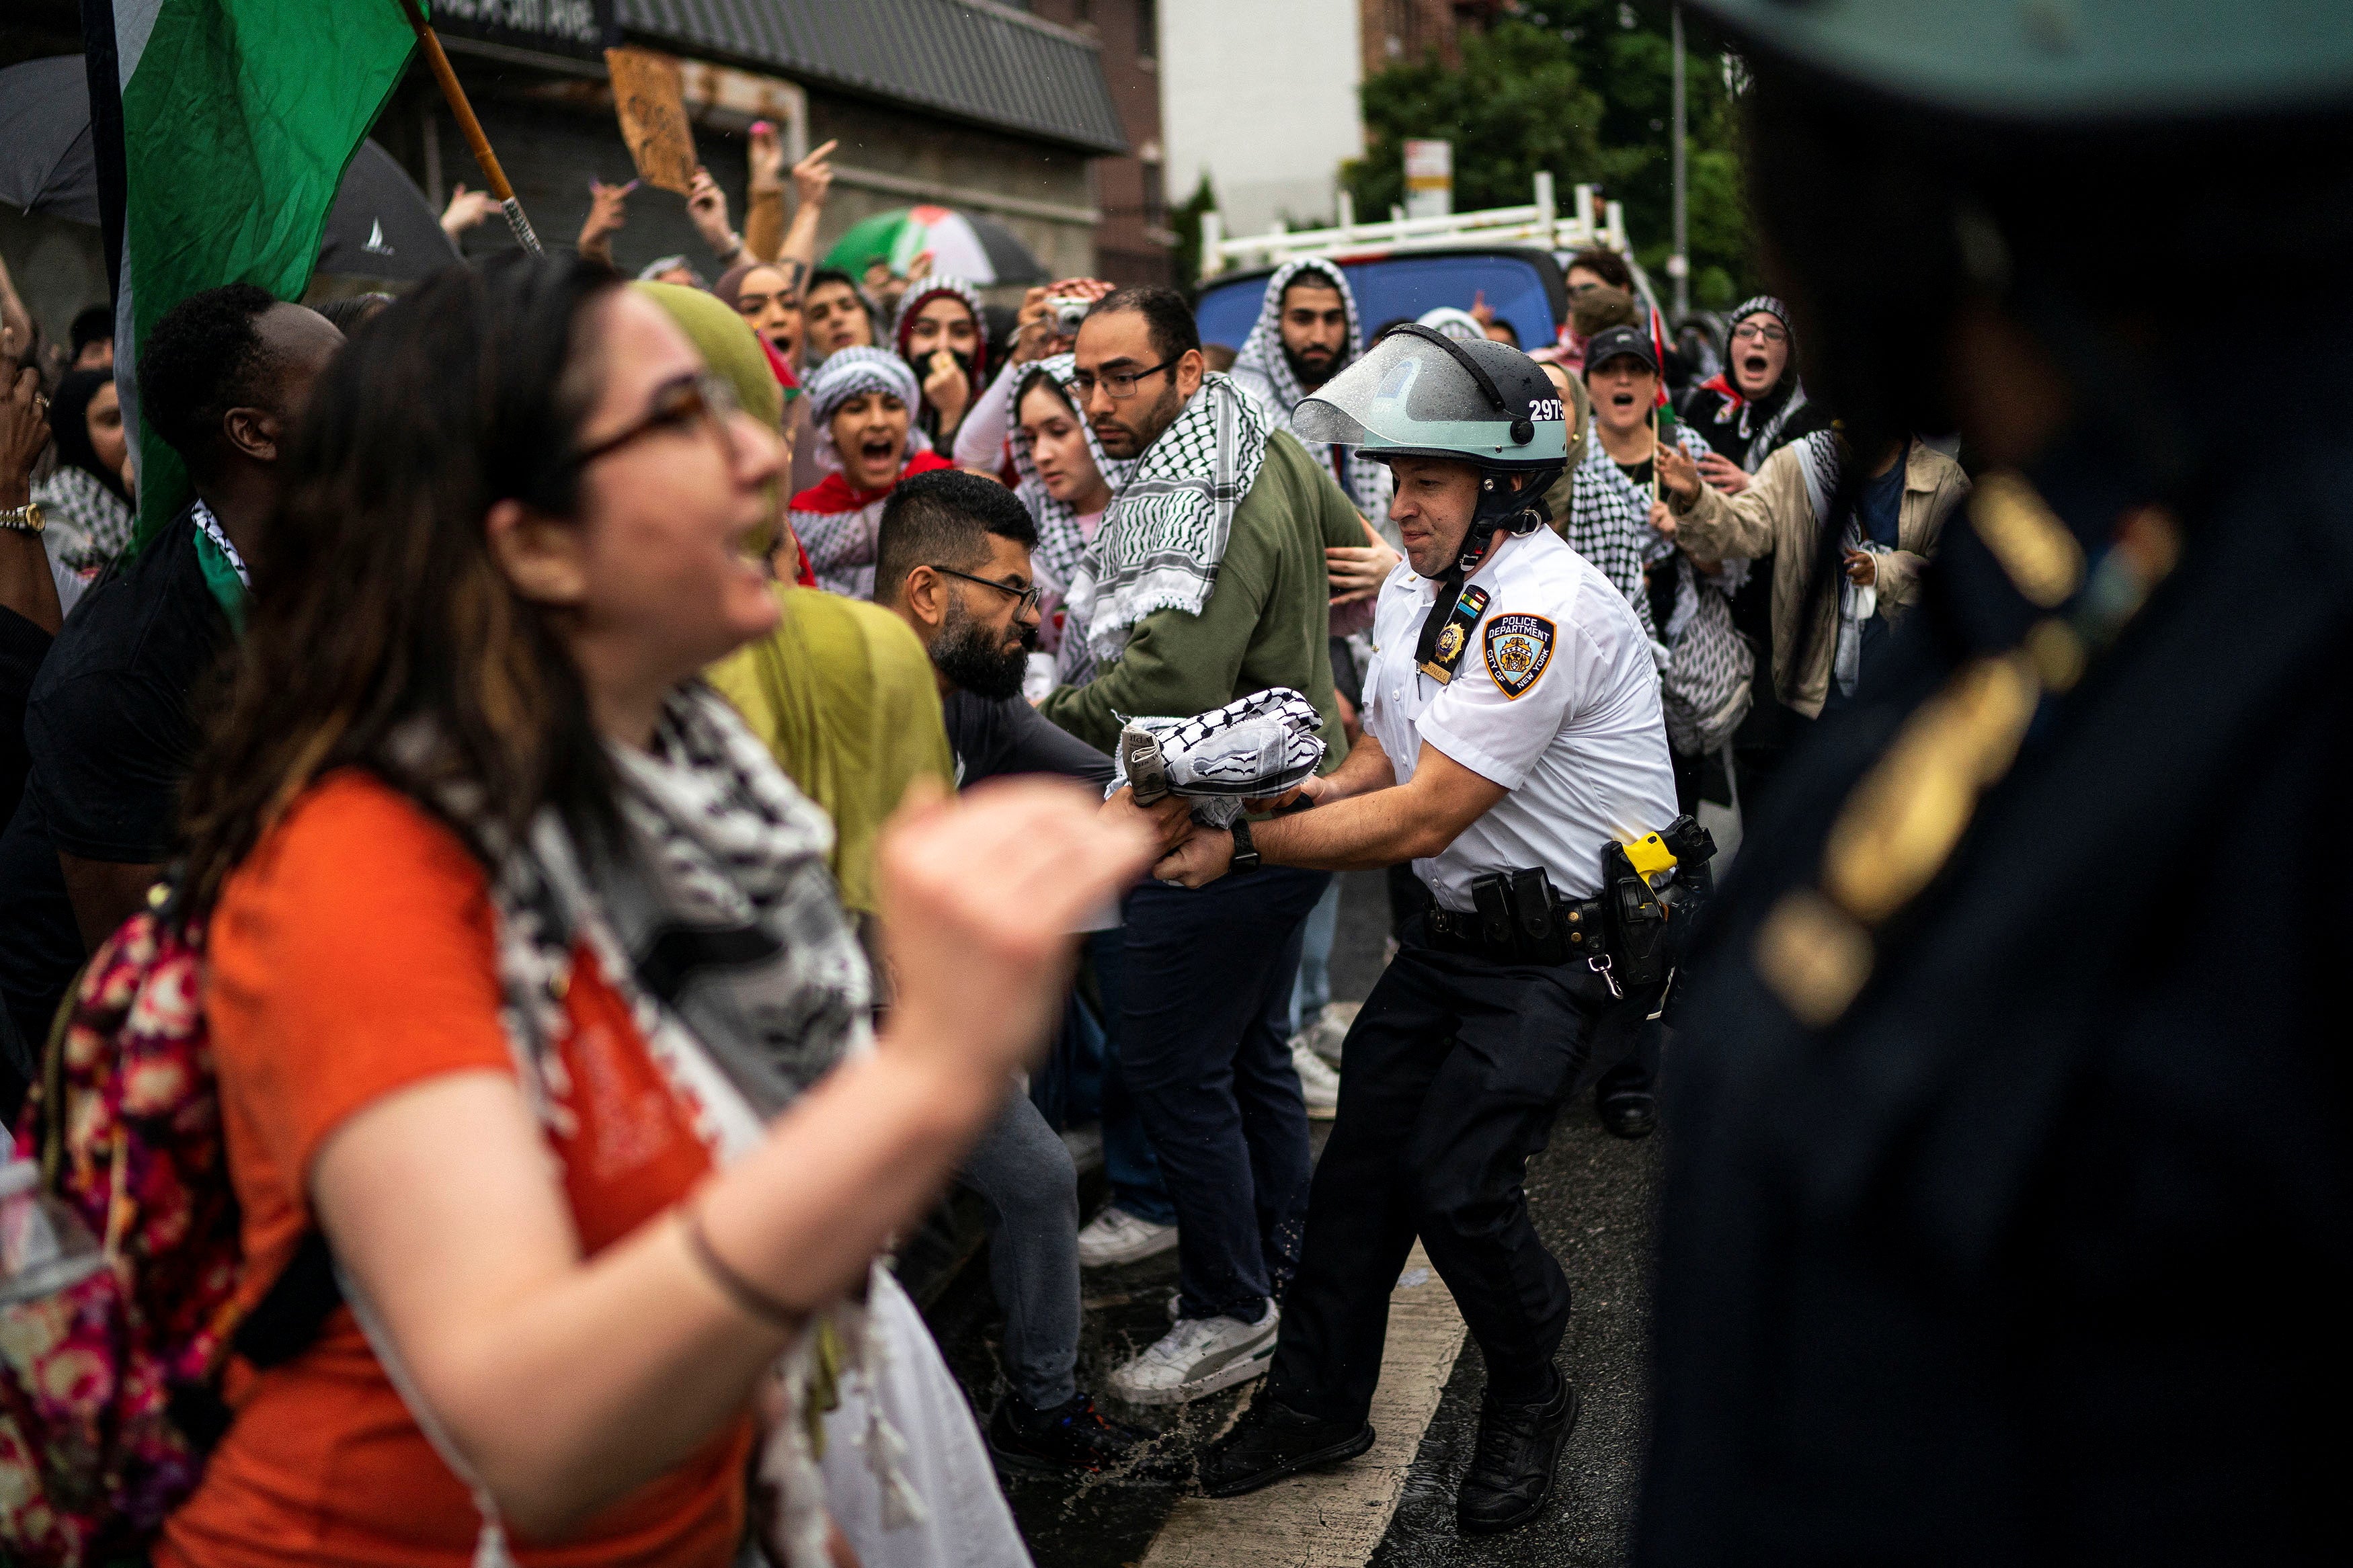 Police and anti-war protesters clash in Brooklyn, New York during a demonstration on 18 May organised for the 76th anniversary of the Nabka